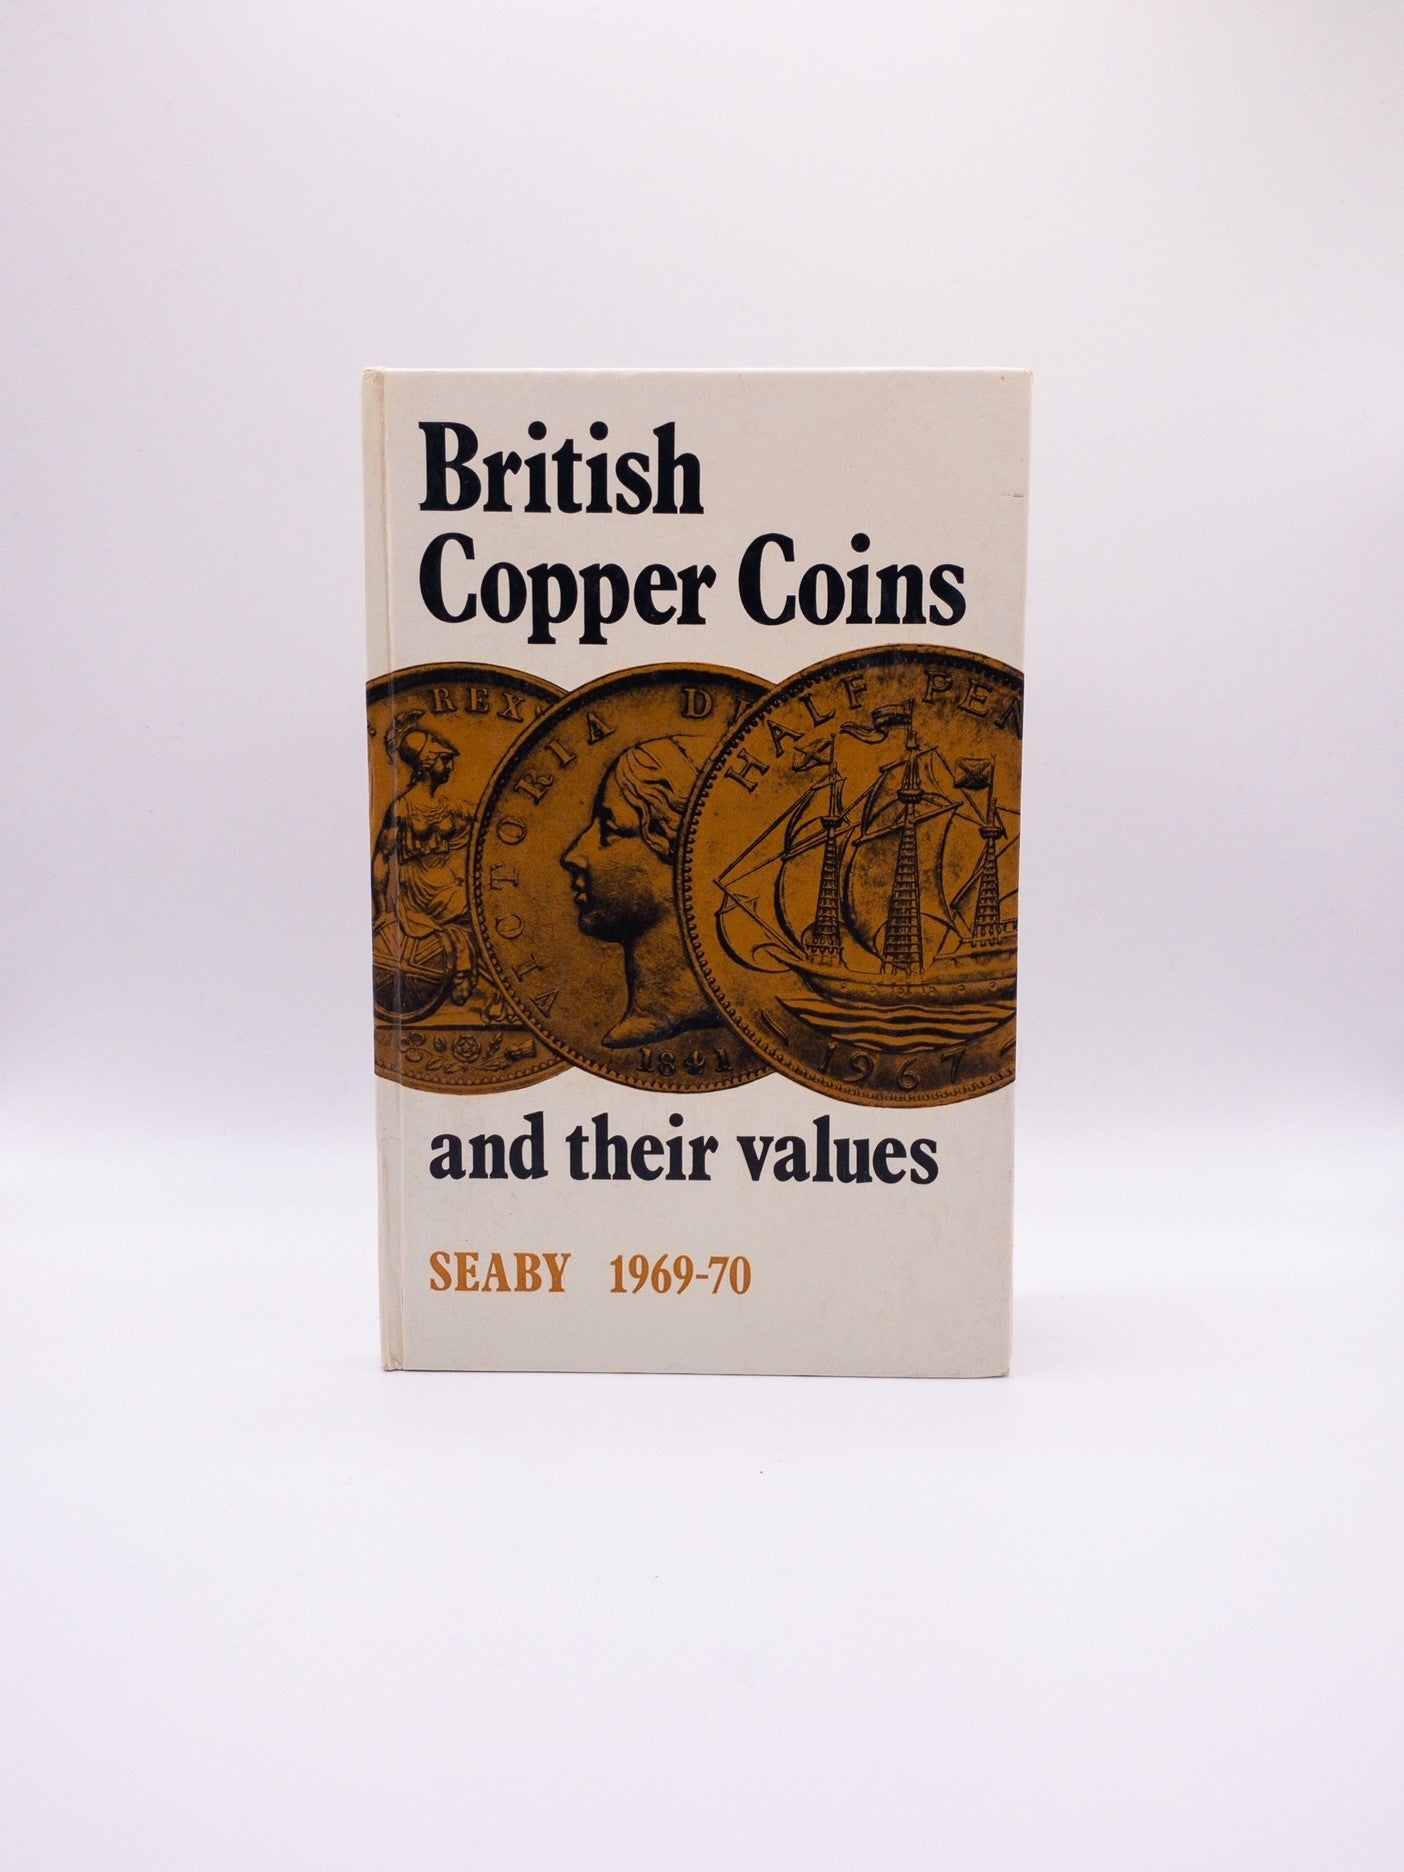 British Copper Coins and their Values, 1969-70 by P.J. Seaby